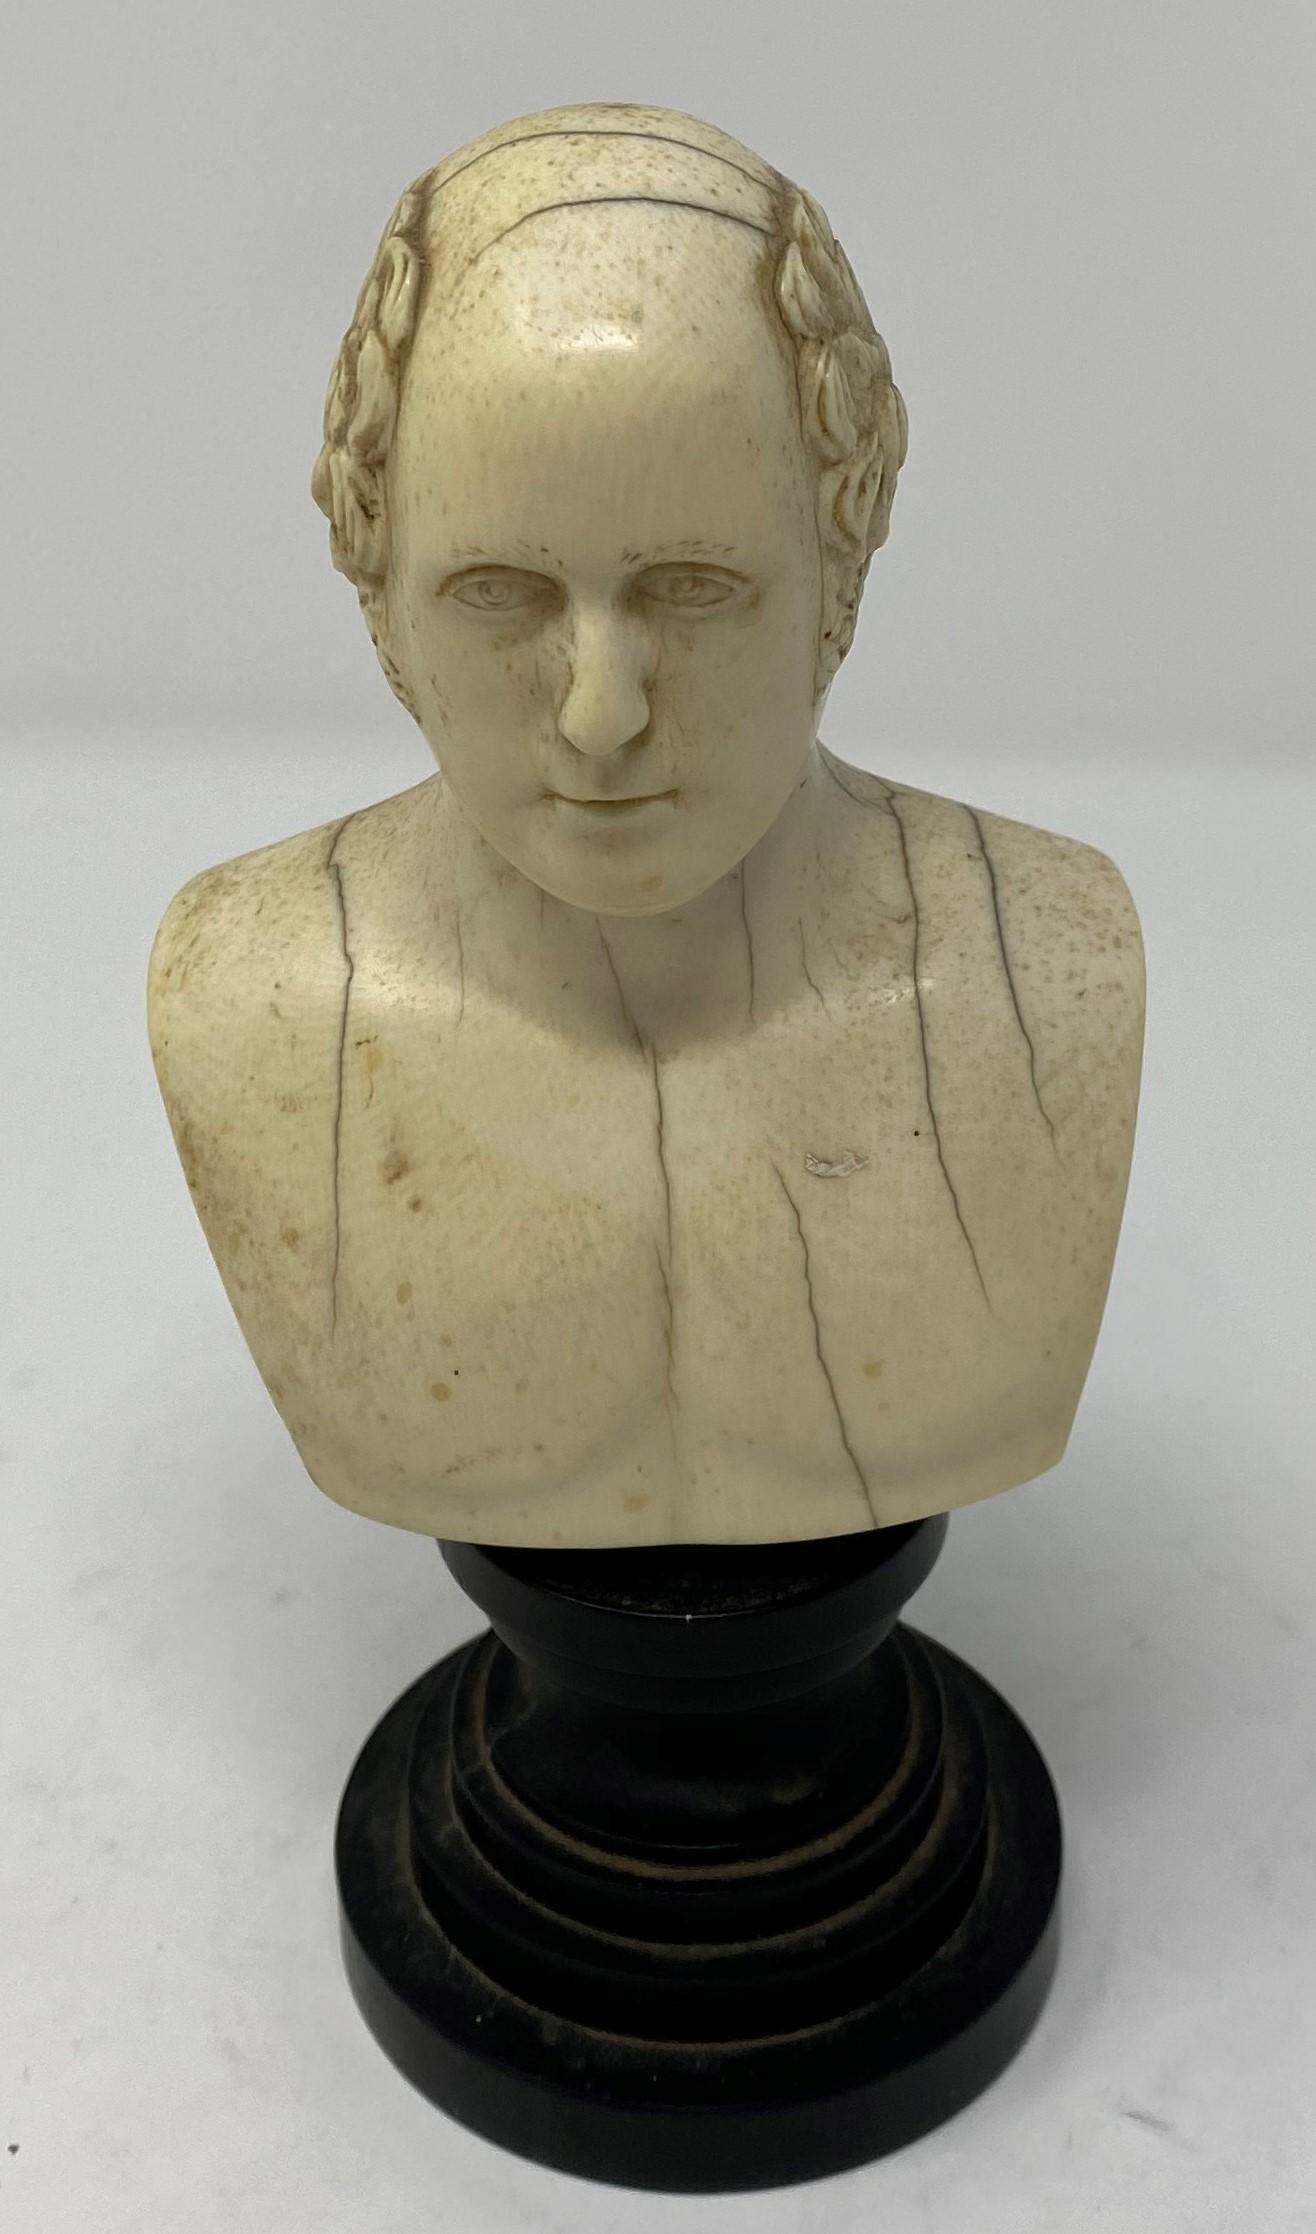 An early 19th century English carved ivory bust, of a gentleman, inscribed Kelly, Sculpt 1818, 10.